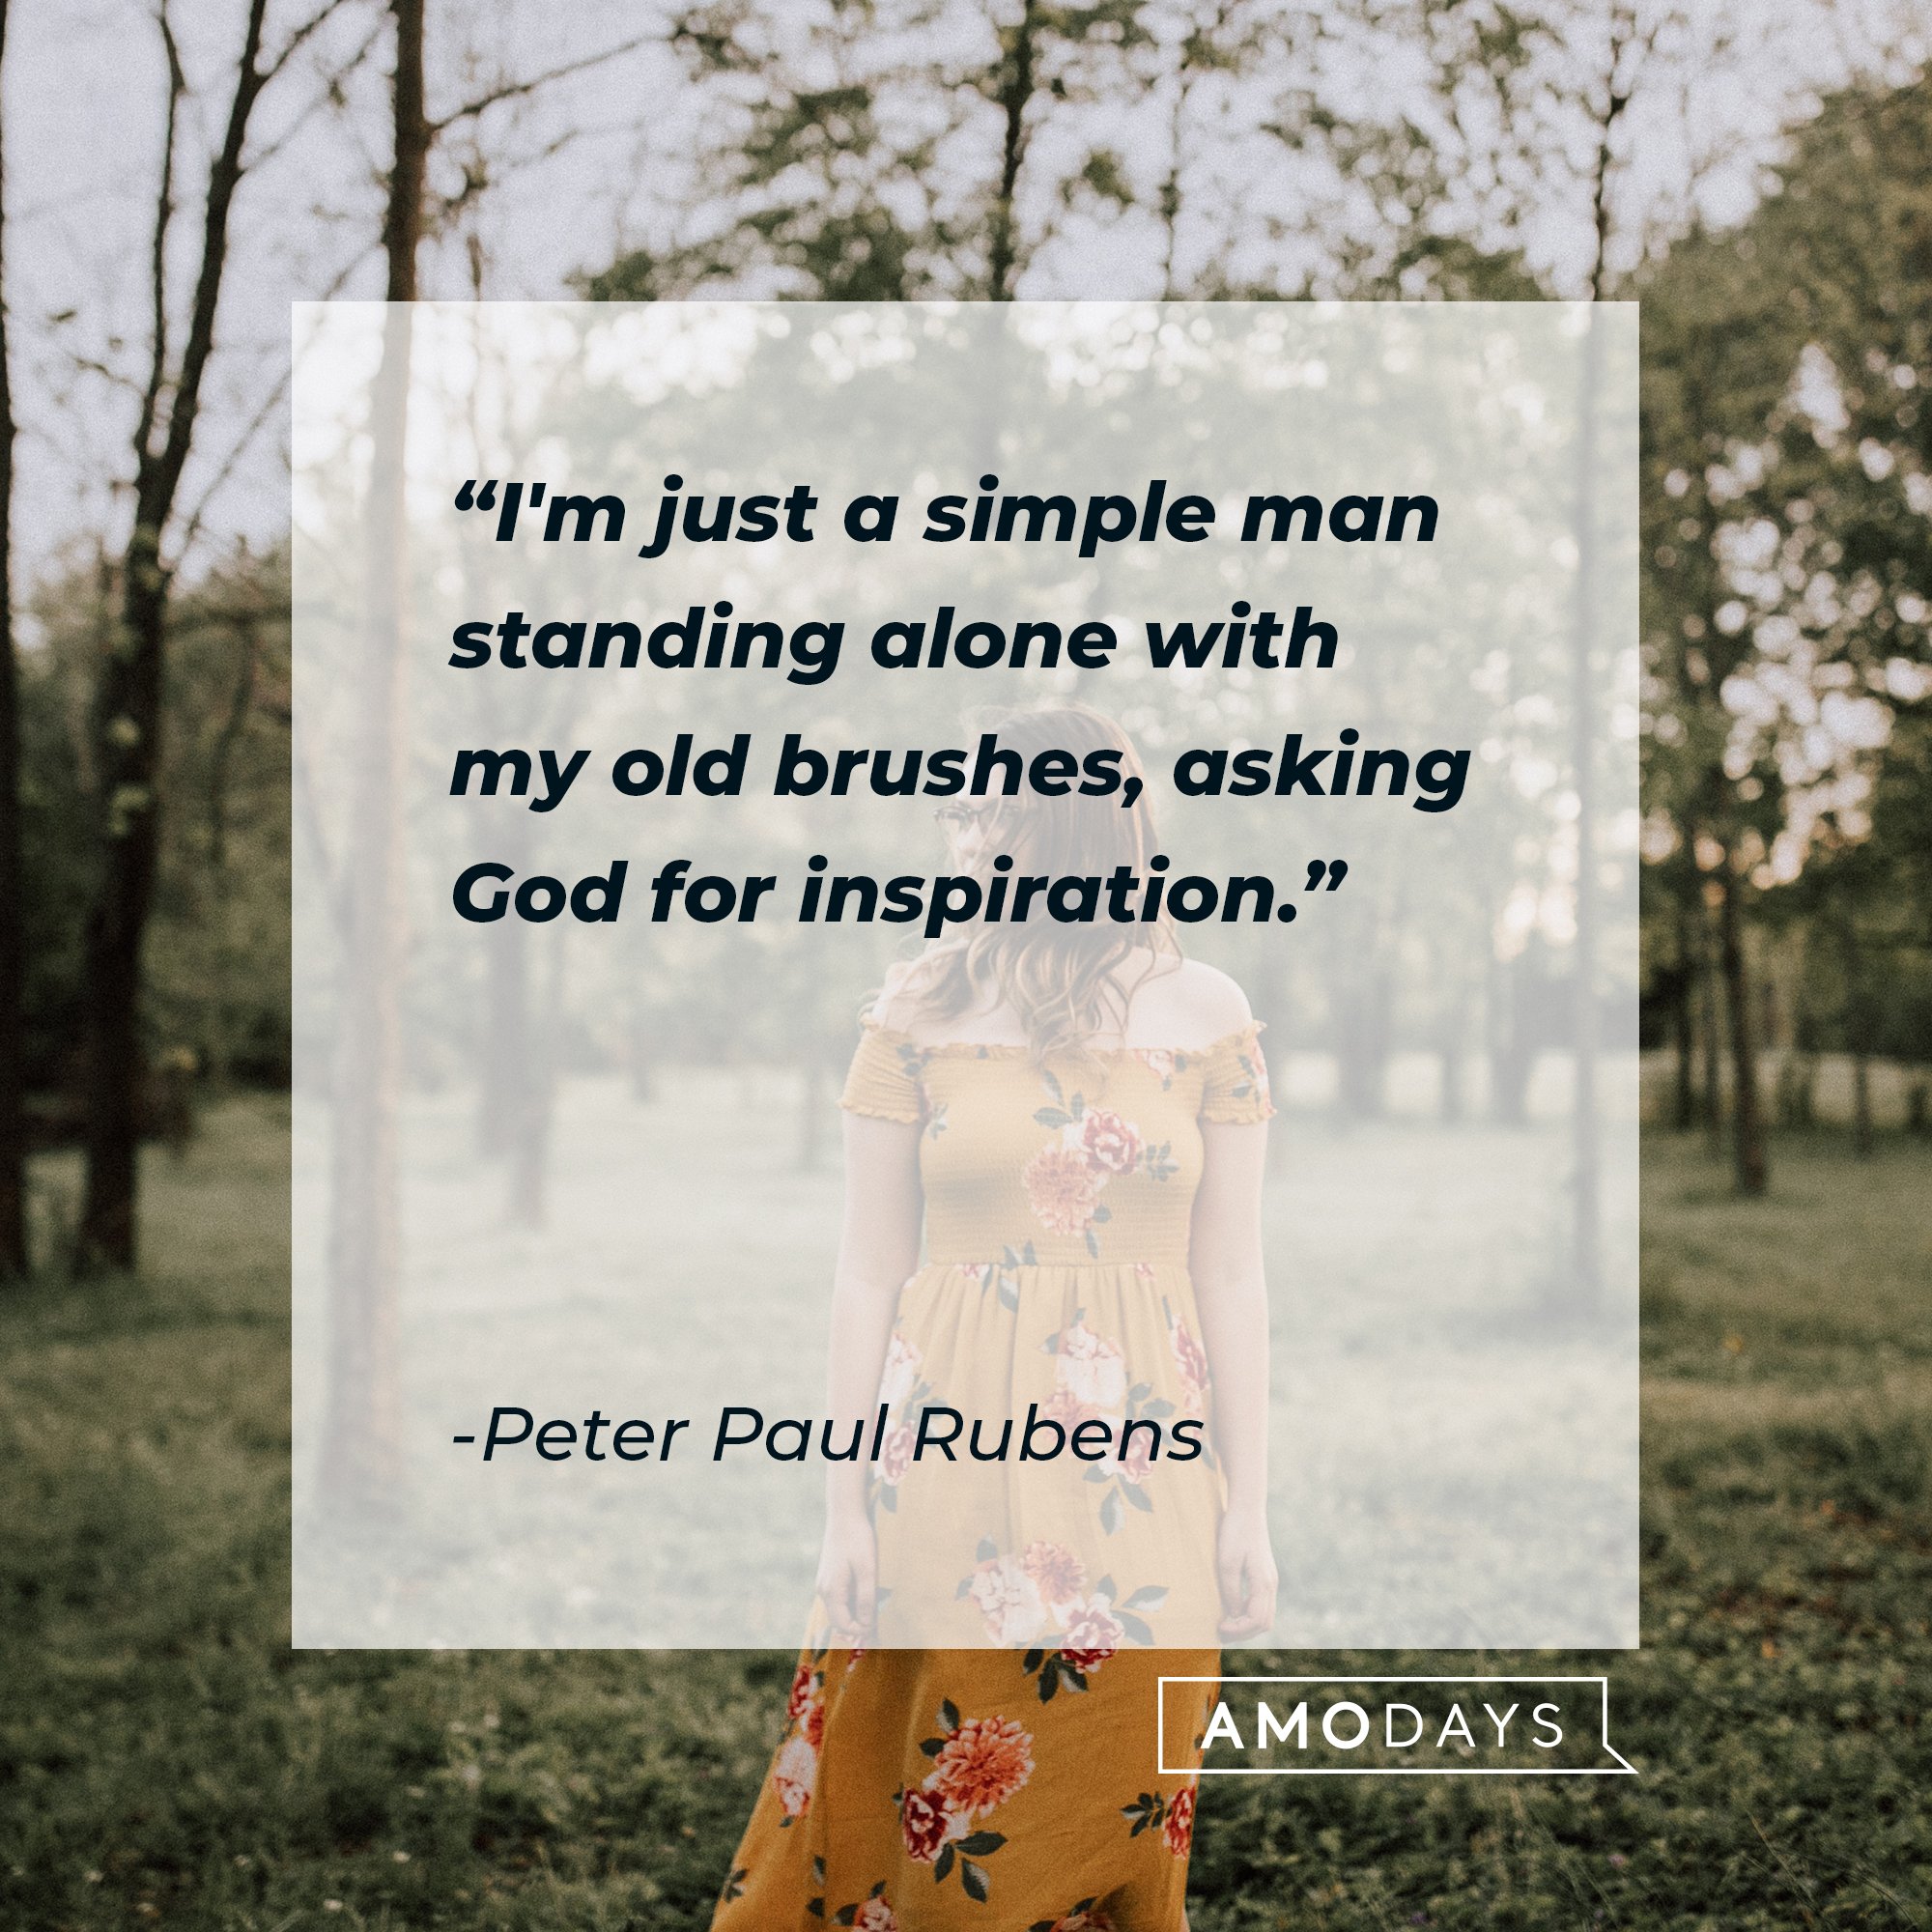 Peter Paul Rubens’ quote: "I'm just a simple man standing alone with my old brushes, asking God for inspiration." | Image: AmoDays